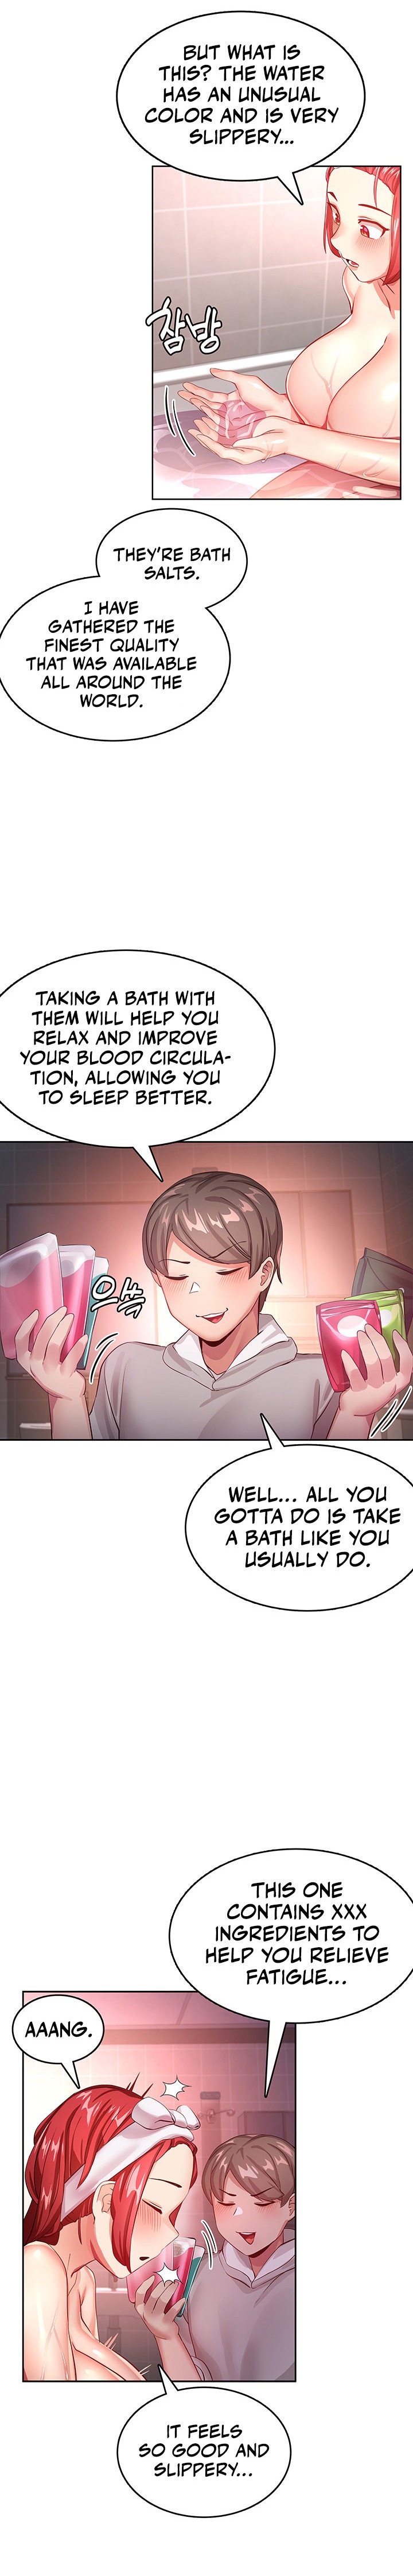 Relationship Reverse Button: Let’s Cure That Arrogant Girl - Chapter 4 Page 11